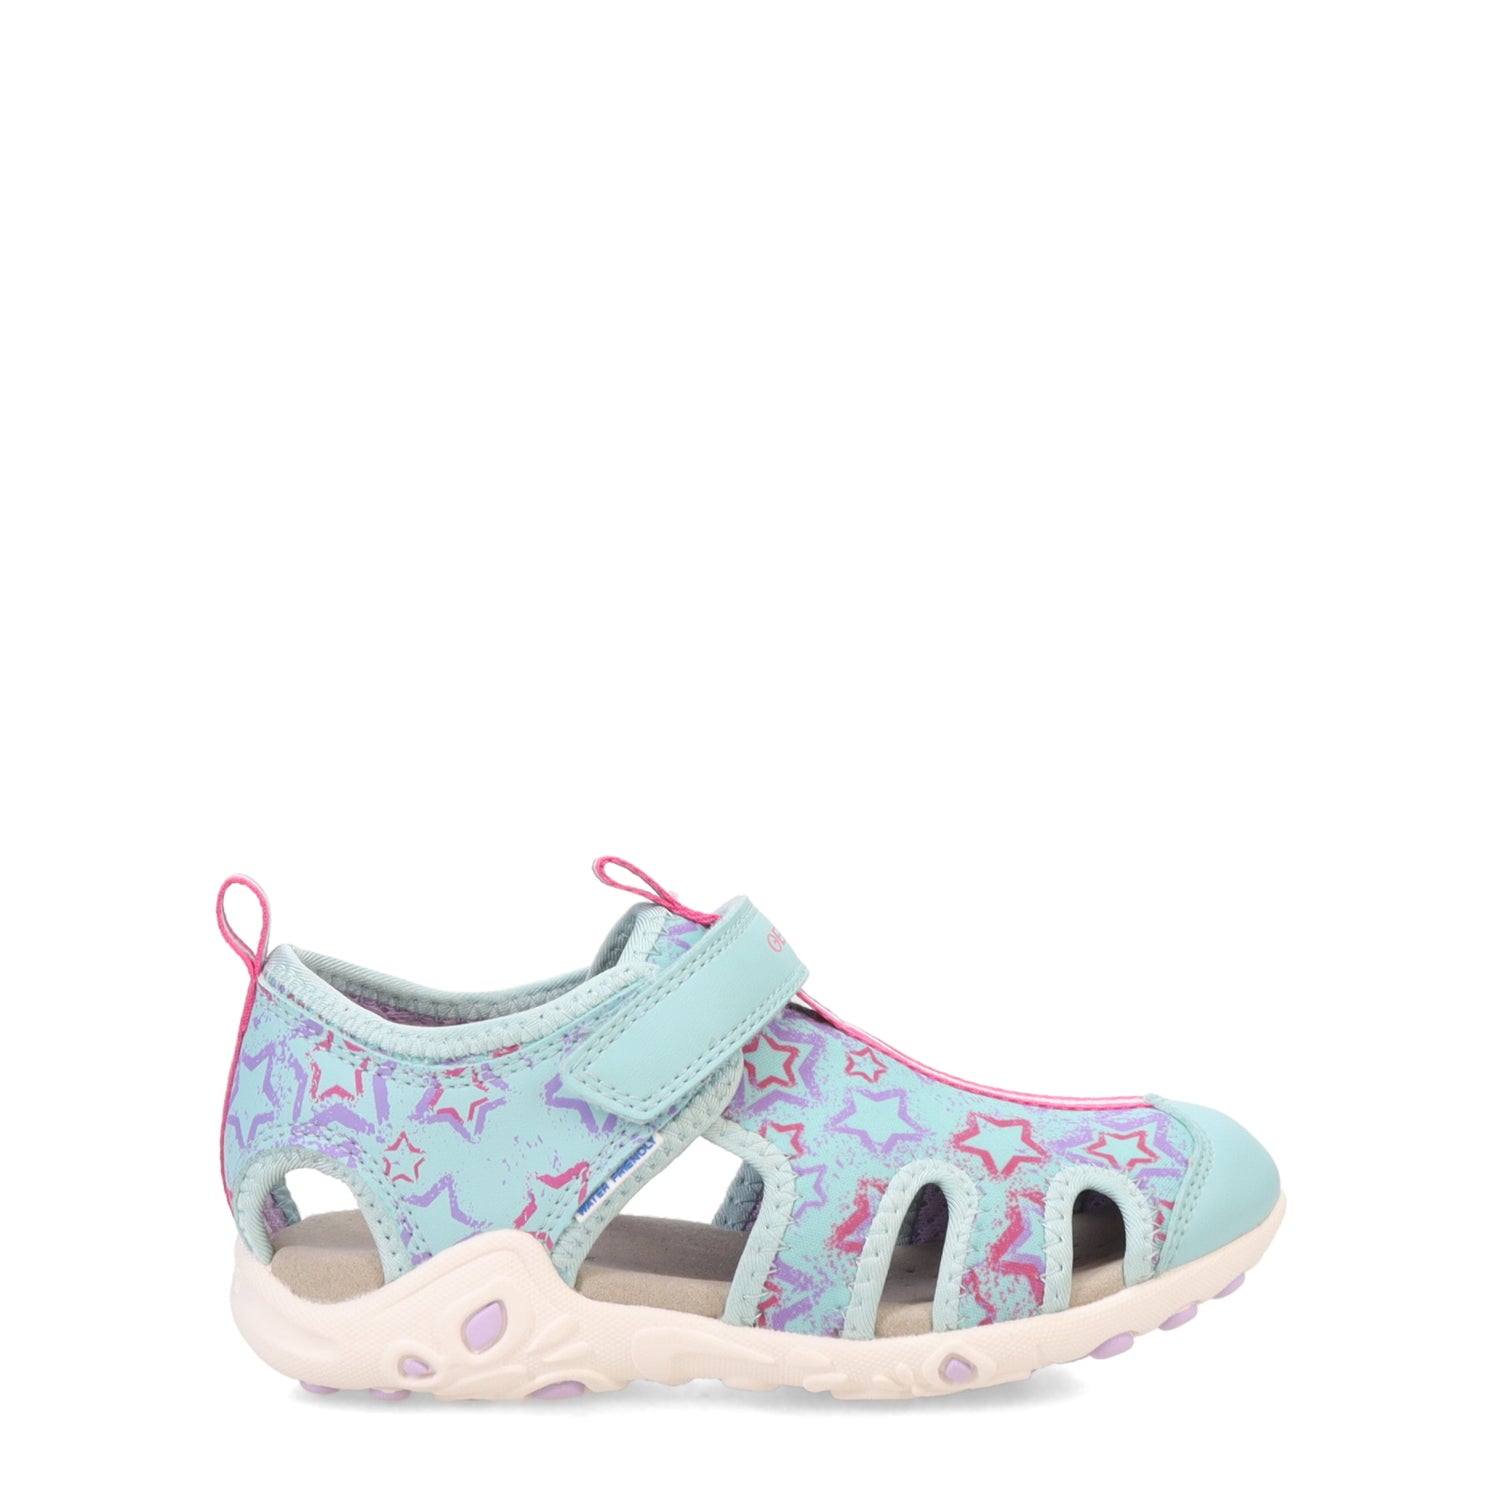 Peltz Shoes  Girl's Geox Whinberry Sandal – Toddler & Little Kid Aqua/Lilac J45GRC-0EE04-C4A8R